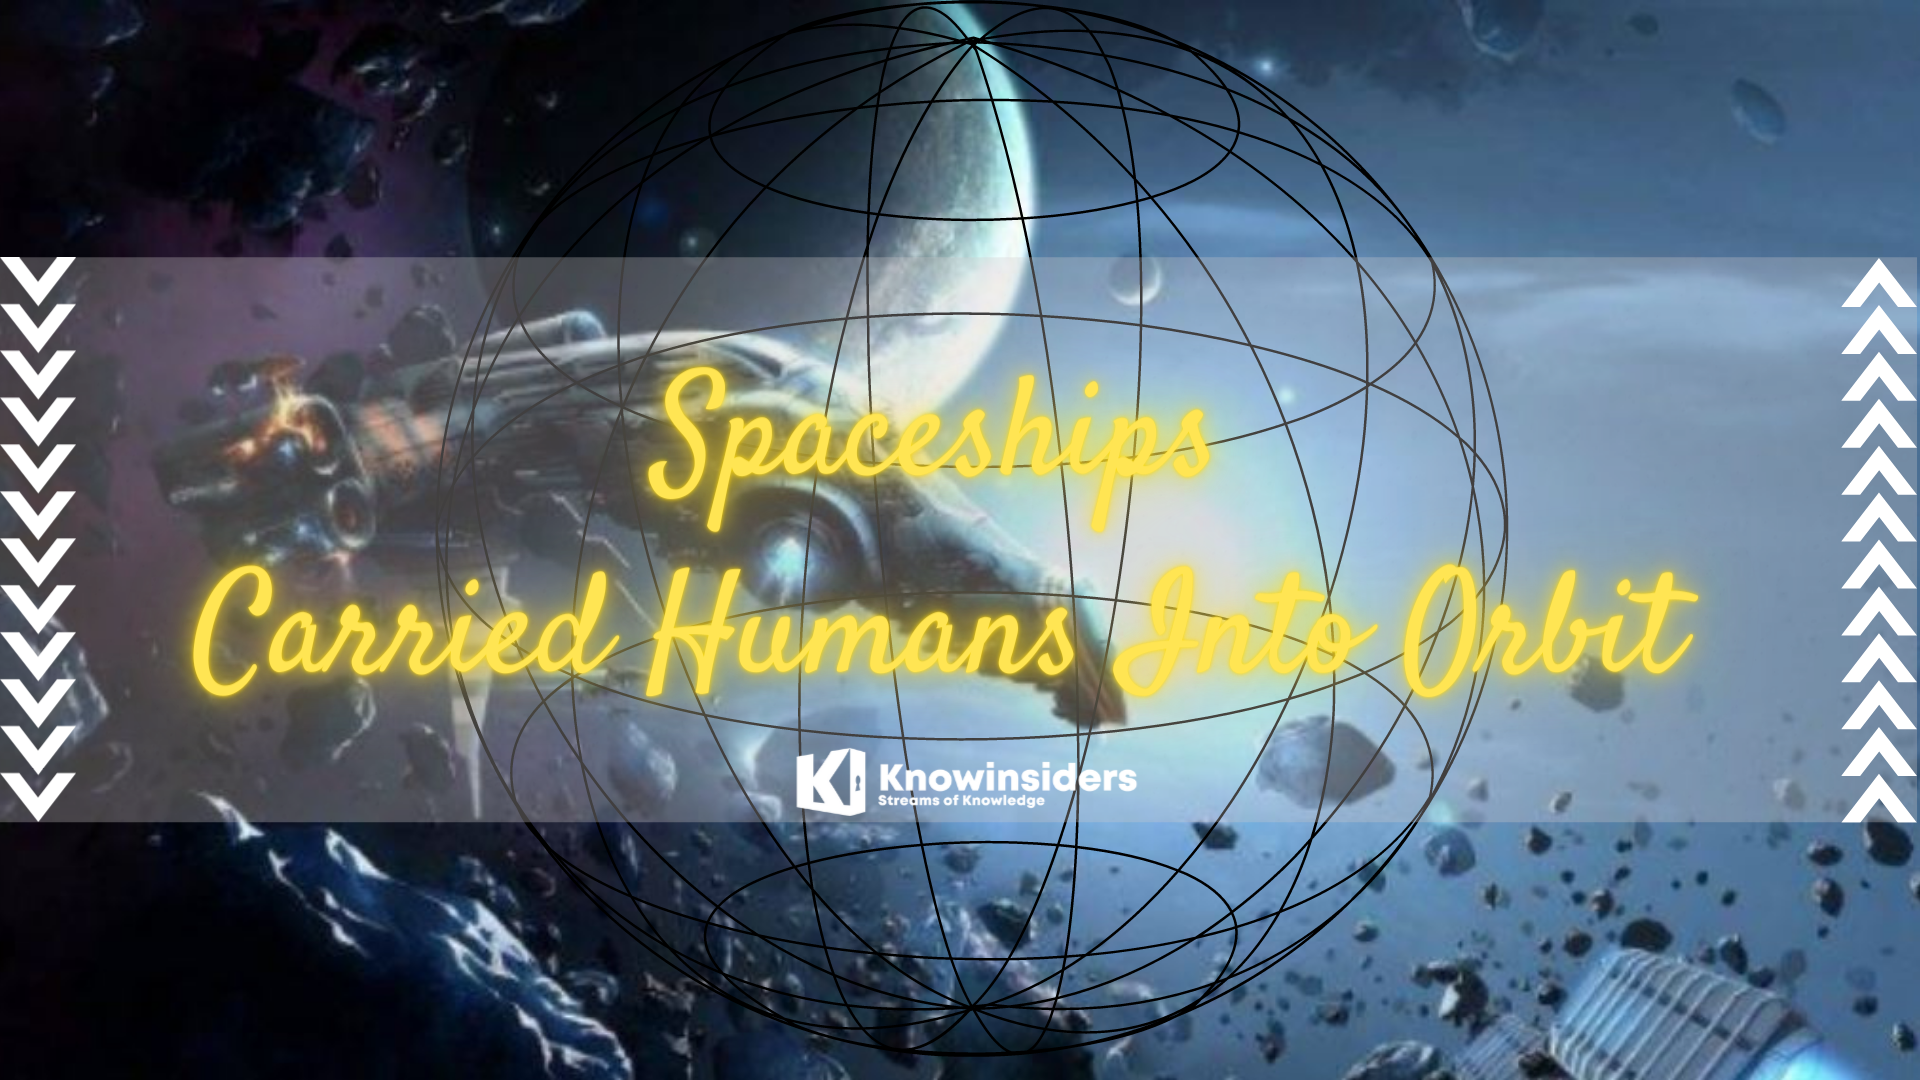 Spaceships Carried Humans Into Orbit. Photo: Knowinsiders.